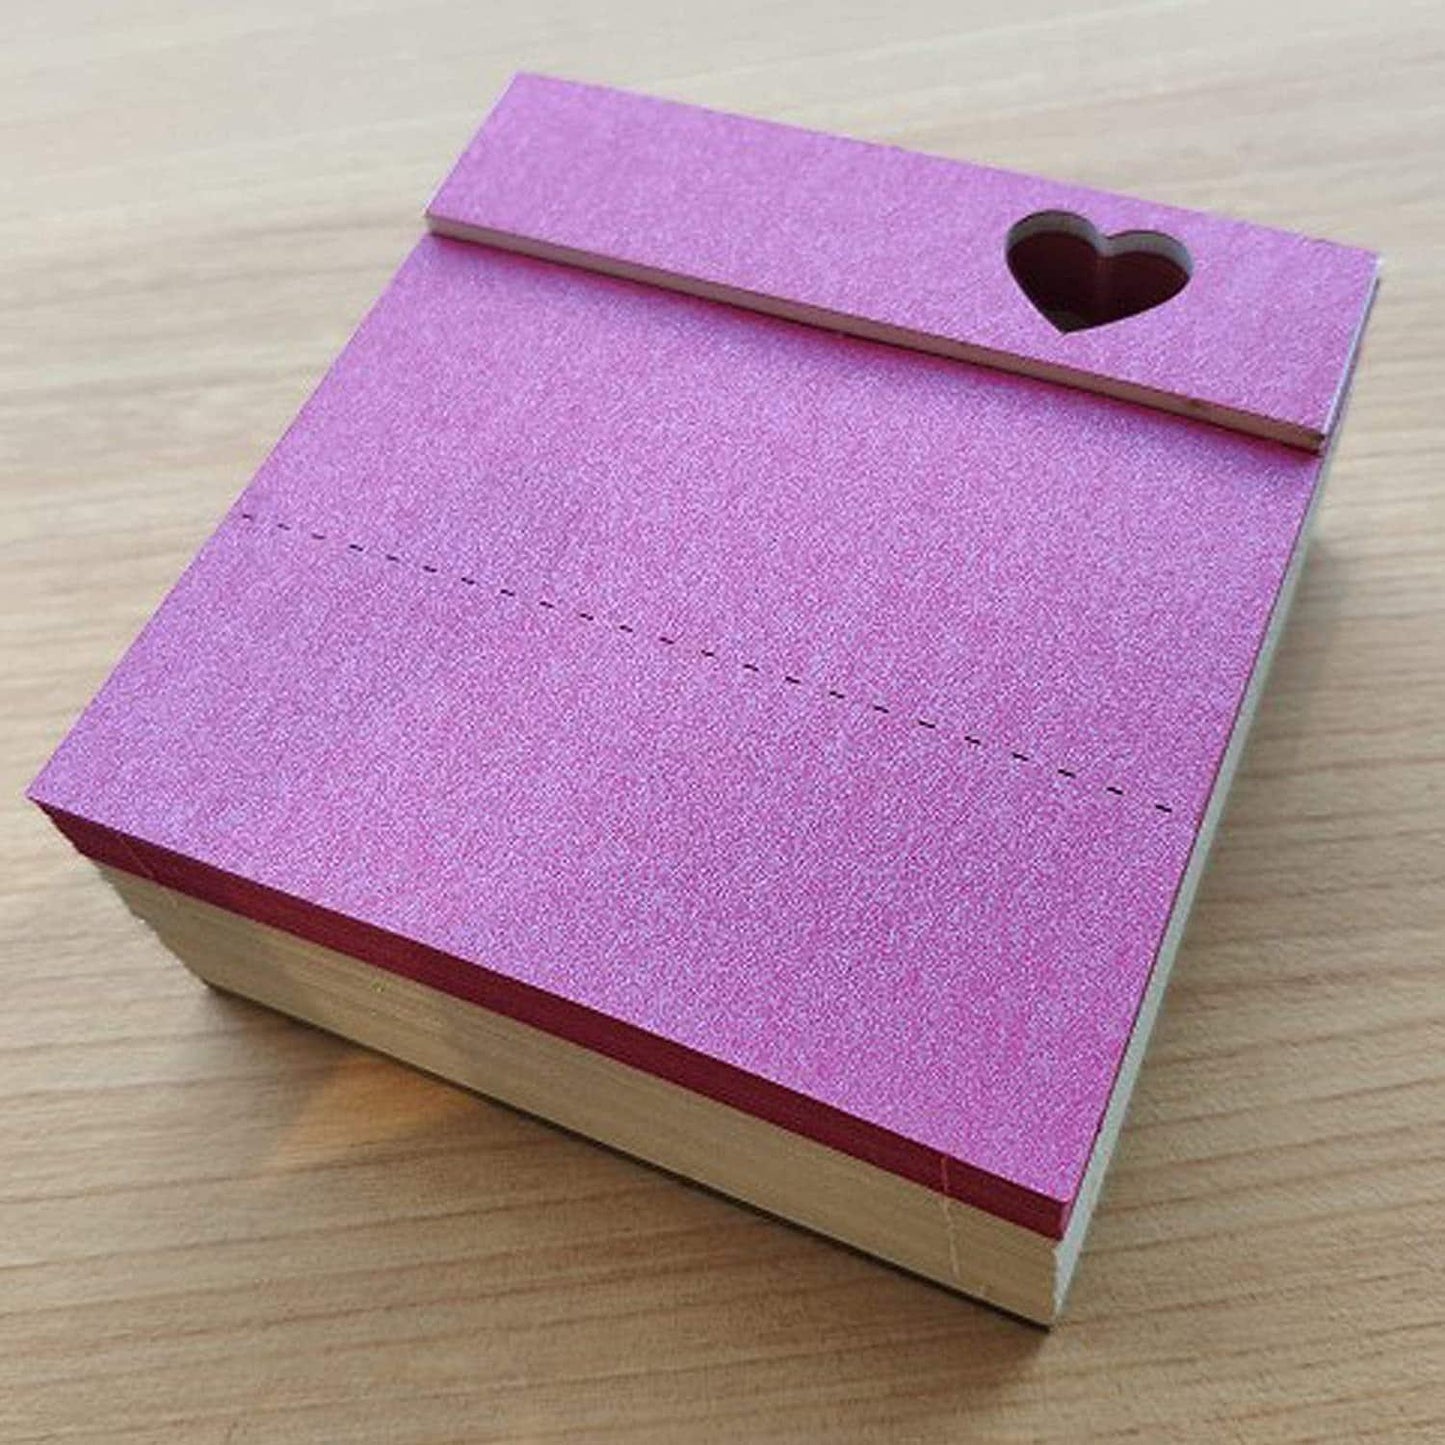 Proposal Ring 3D Note Pad - Creative Memo Pad - Omoshiroi Block - Romantic Gift - Engagement Ring - Gift For Love - Stationery Toys With LED